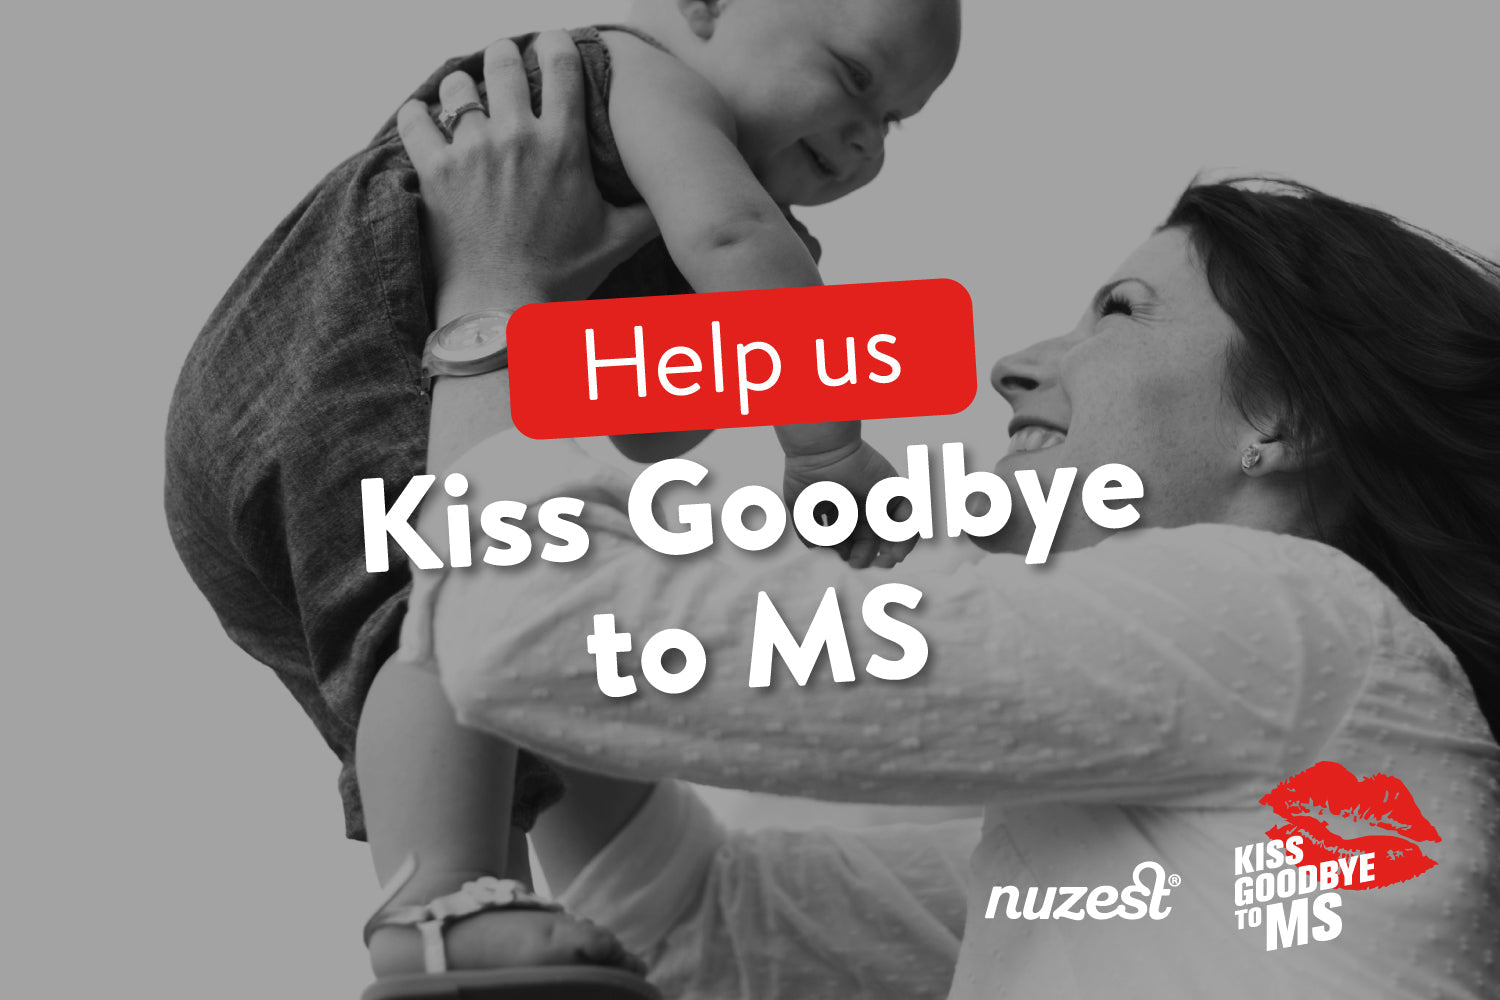 Nuzest Is Now The Official Nutrition Partner For Kiss Goodbye to MS